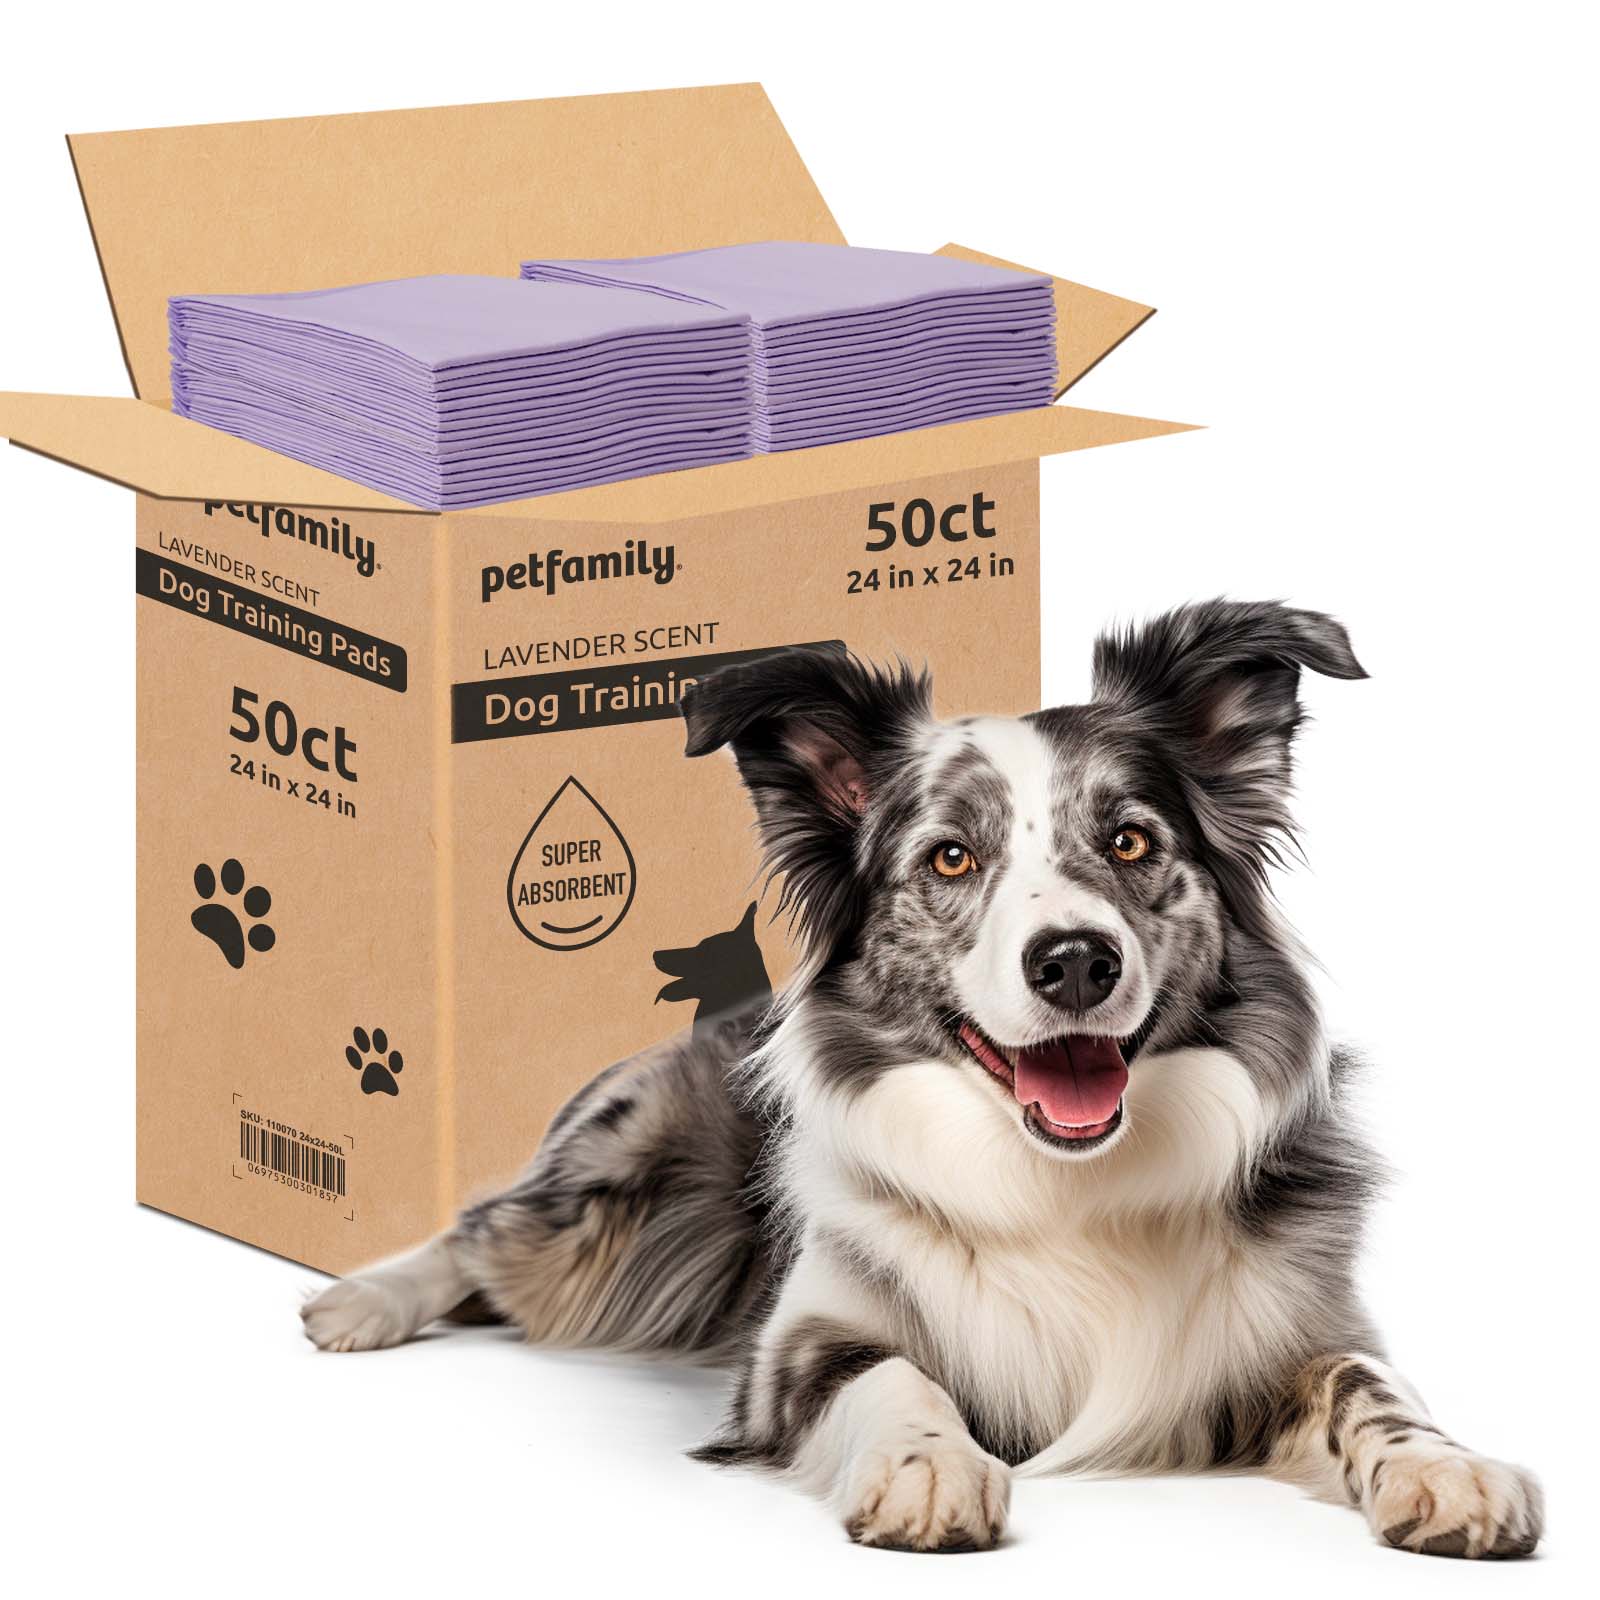 Dog Training Pads 24" x 24" 50 Pieces, Lavender Scent - Quick Drying and Ultra Absorbent